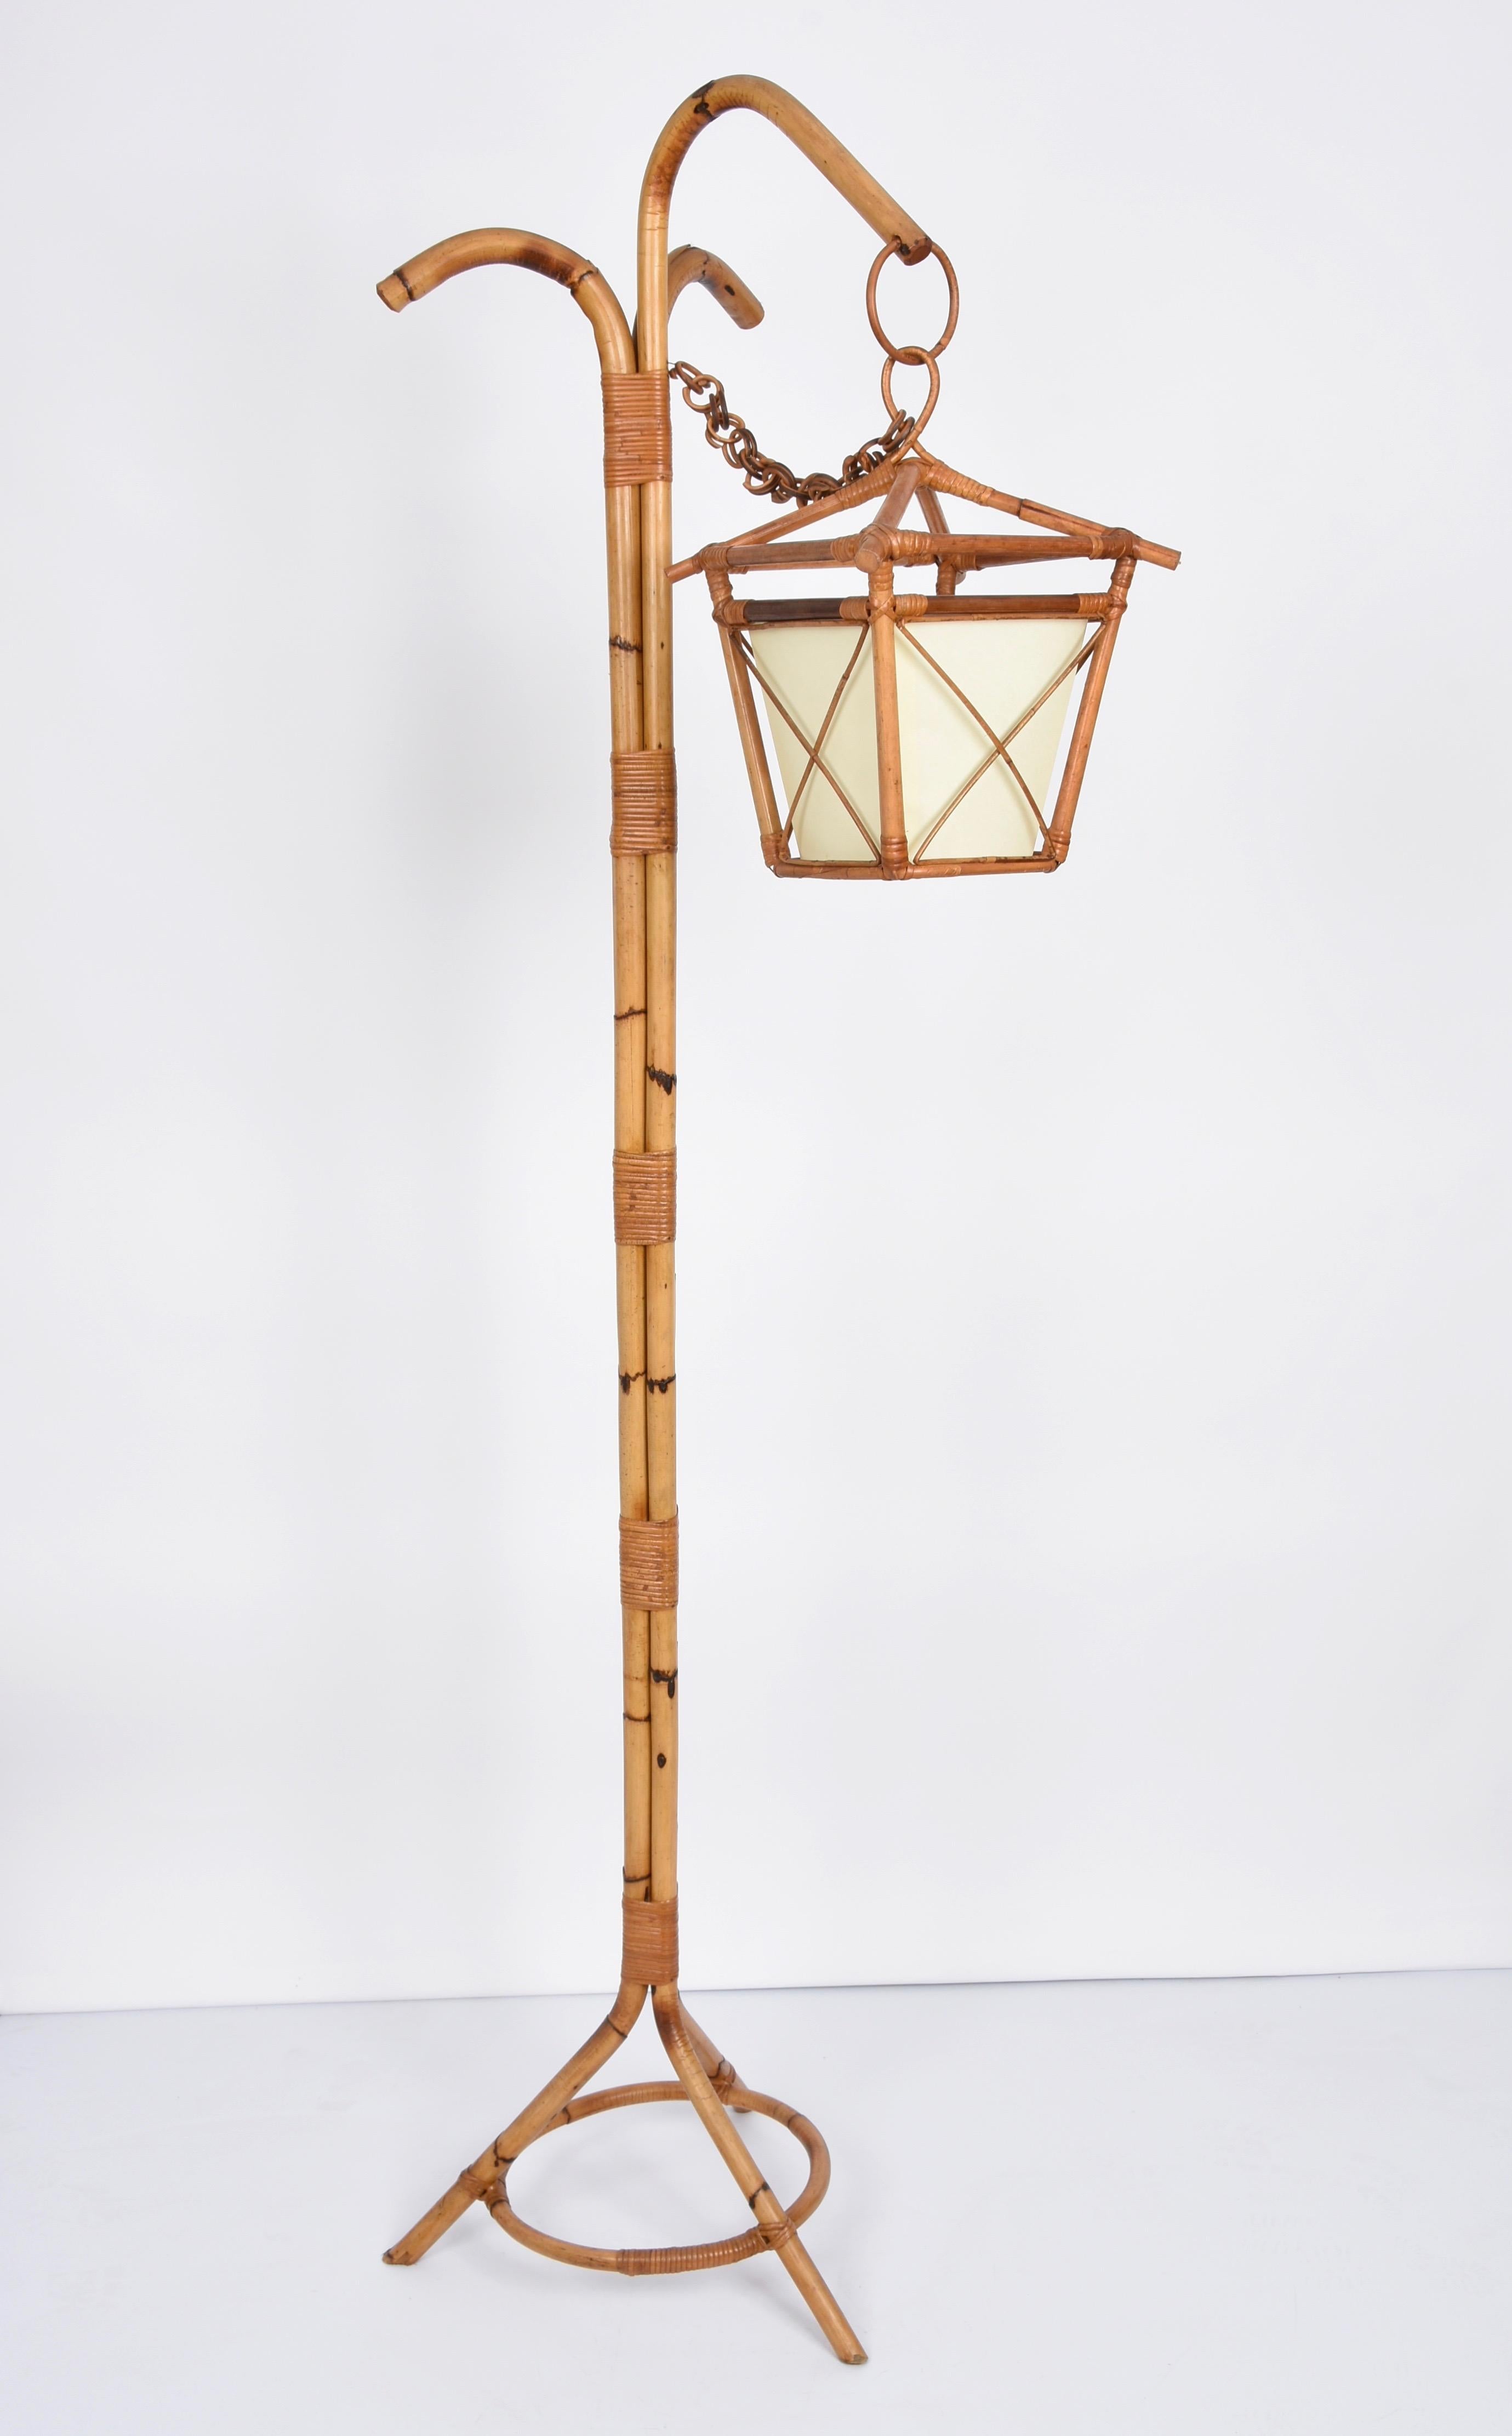 Midcentury Bamboo and Rattan Italian Floor Lamp with Tripod Base, 1950s For Sale 2